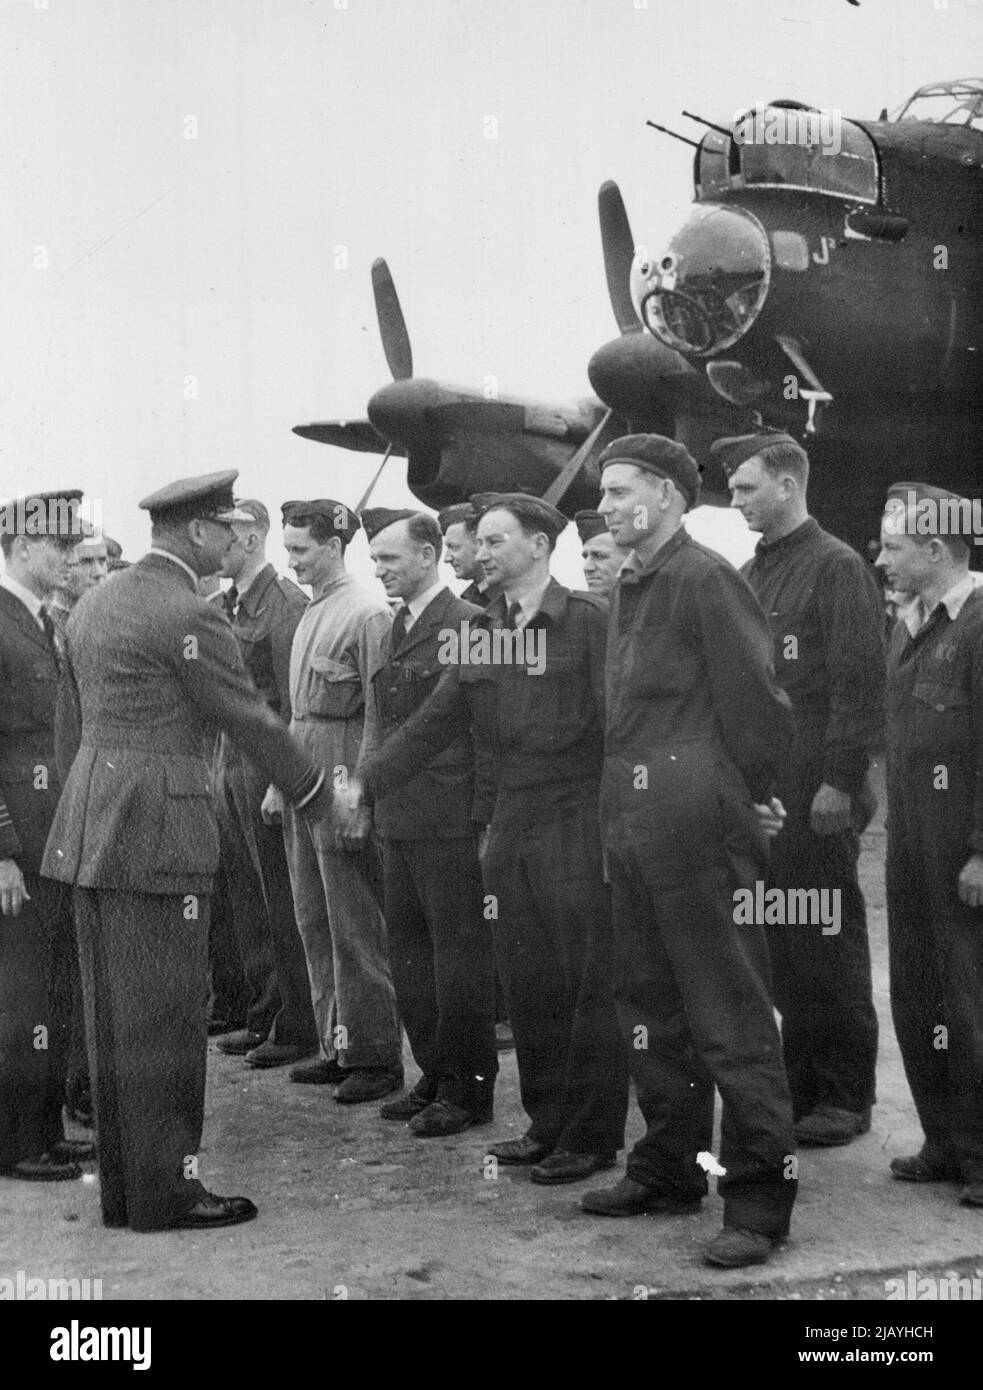 Duke Of Gloucester Visits Australian Bomber Squadron In Britain - The Duke of Gloucester, Governor-General designate of the Commonwealth of Australia, had special interest in the ground staff of a famous Australian Lancaster Squadron. In a visit to their station in England he chatted with the men about their homeland where he will soon take up his appointment. October 24, 1944. (Photo by Photographic News Agencies, Ltd.) Stock Photo